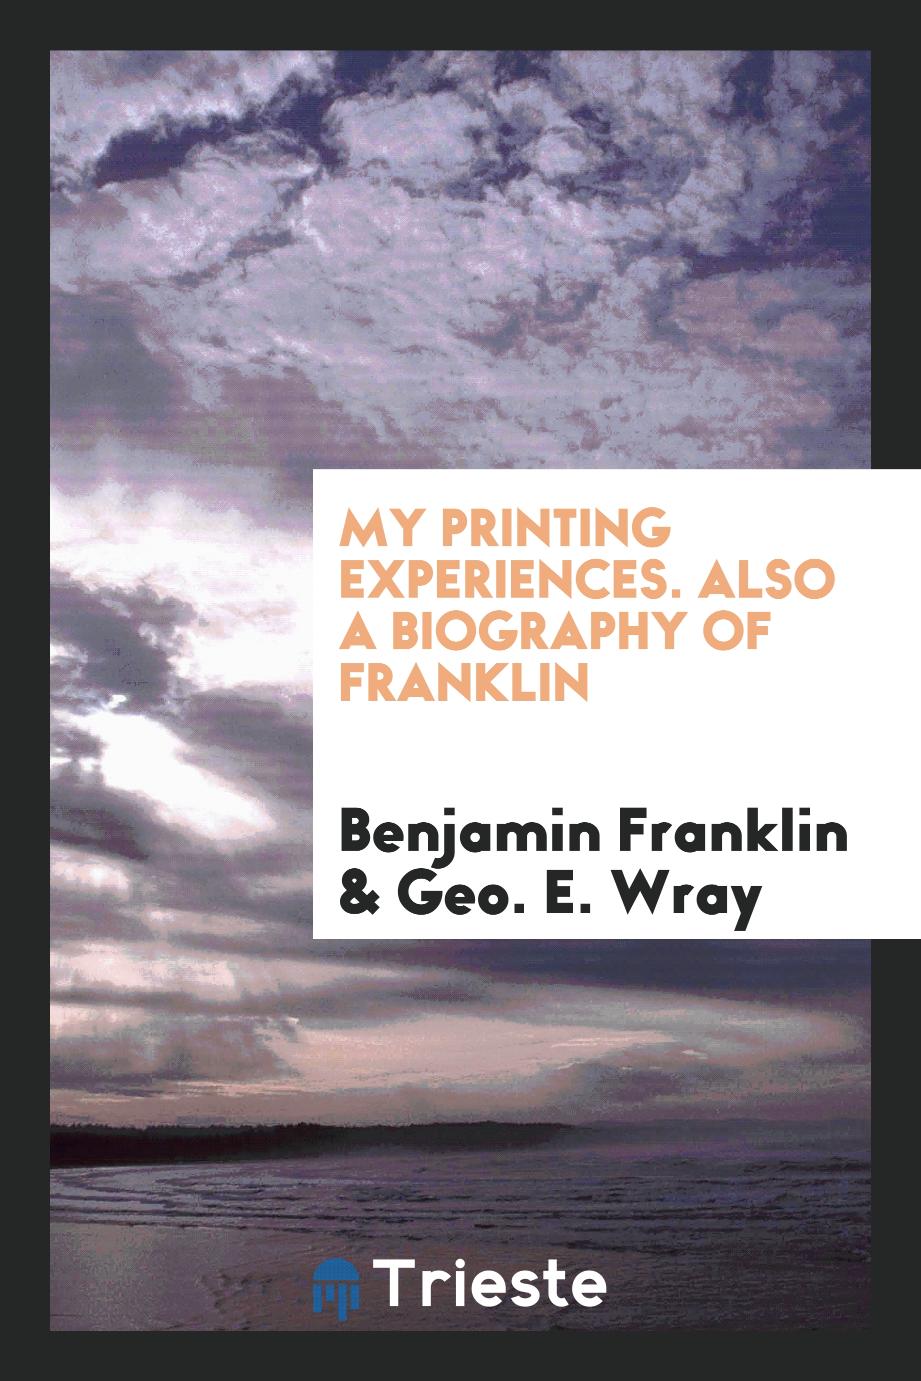 My printing experiences. Also a biography of Franklin